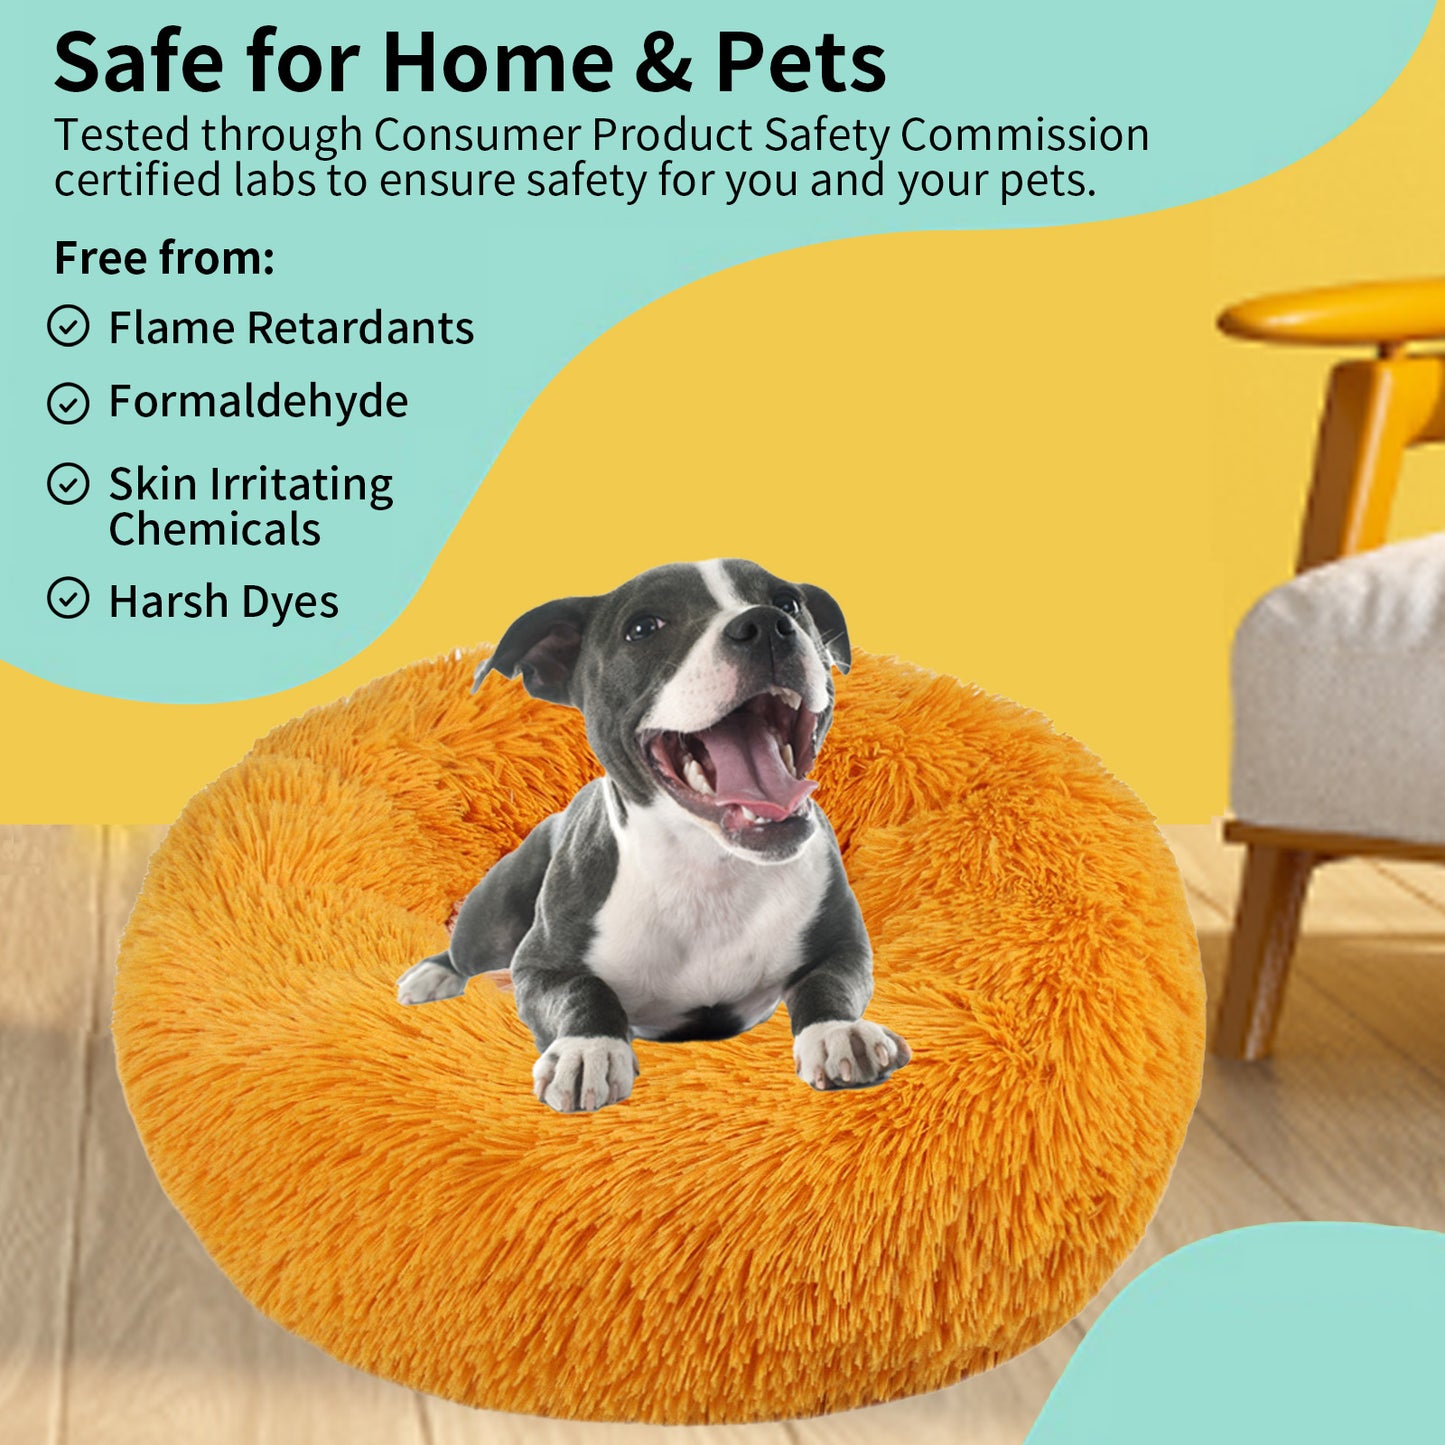 AIITLE high-quality dog or cat bed, furry, harmless and soft plush | AIITLE